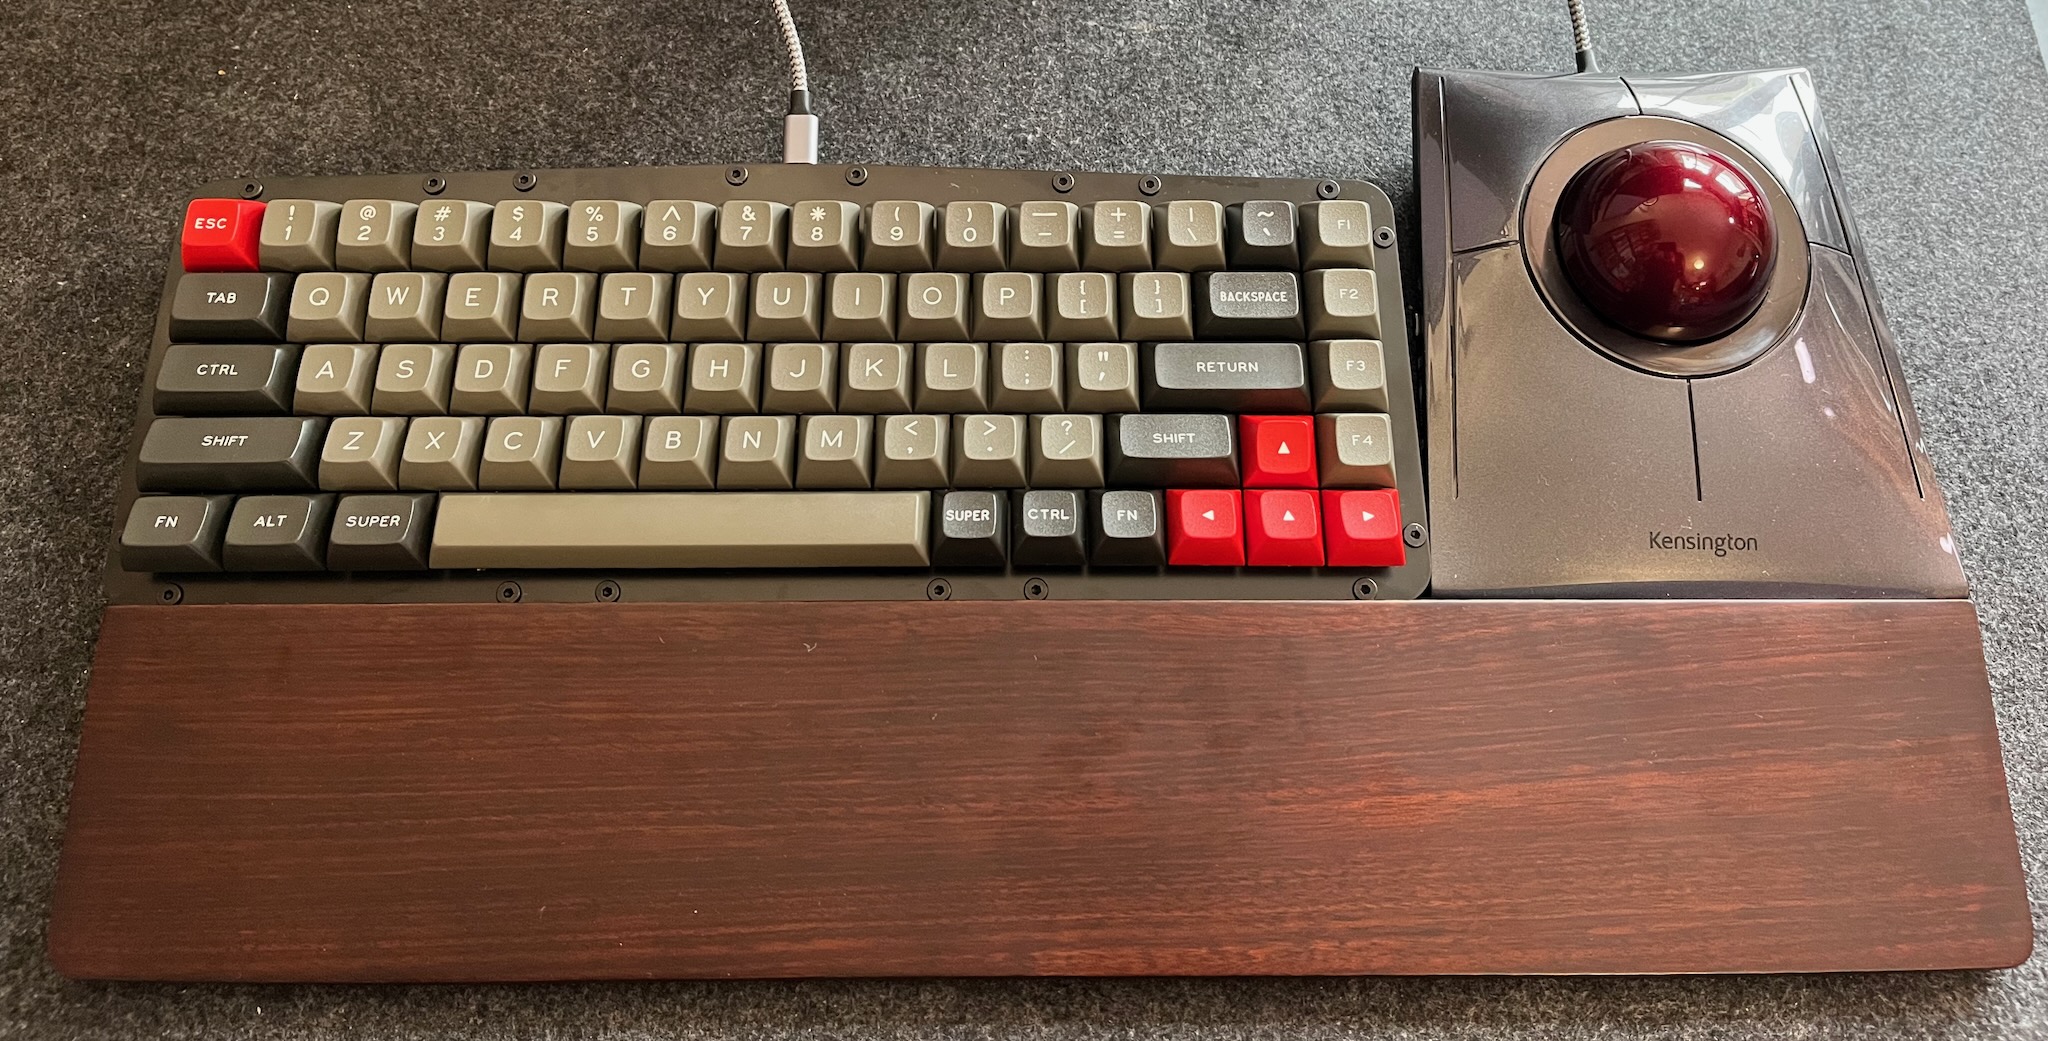 a compact keyboard; most of the keycaps are warm grey with white legends, but the modifiers and special keys are black and white, escept for escape and arrows which are red and white; to the right is a Kensington Slimblade trackball, and below both of them is a dark wooden wrist rest